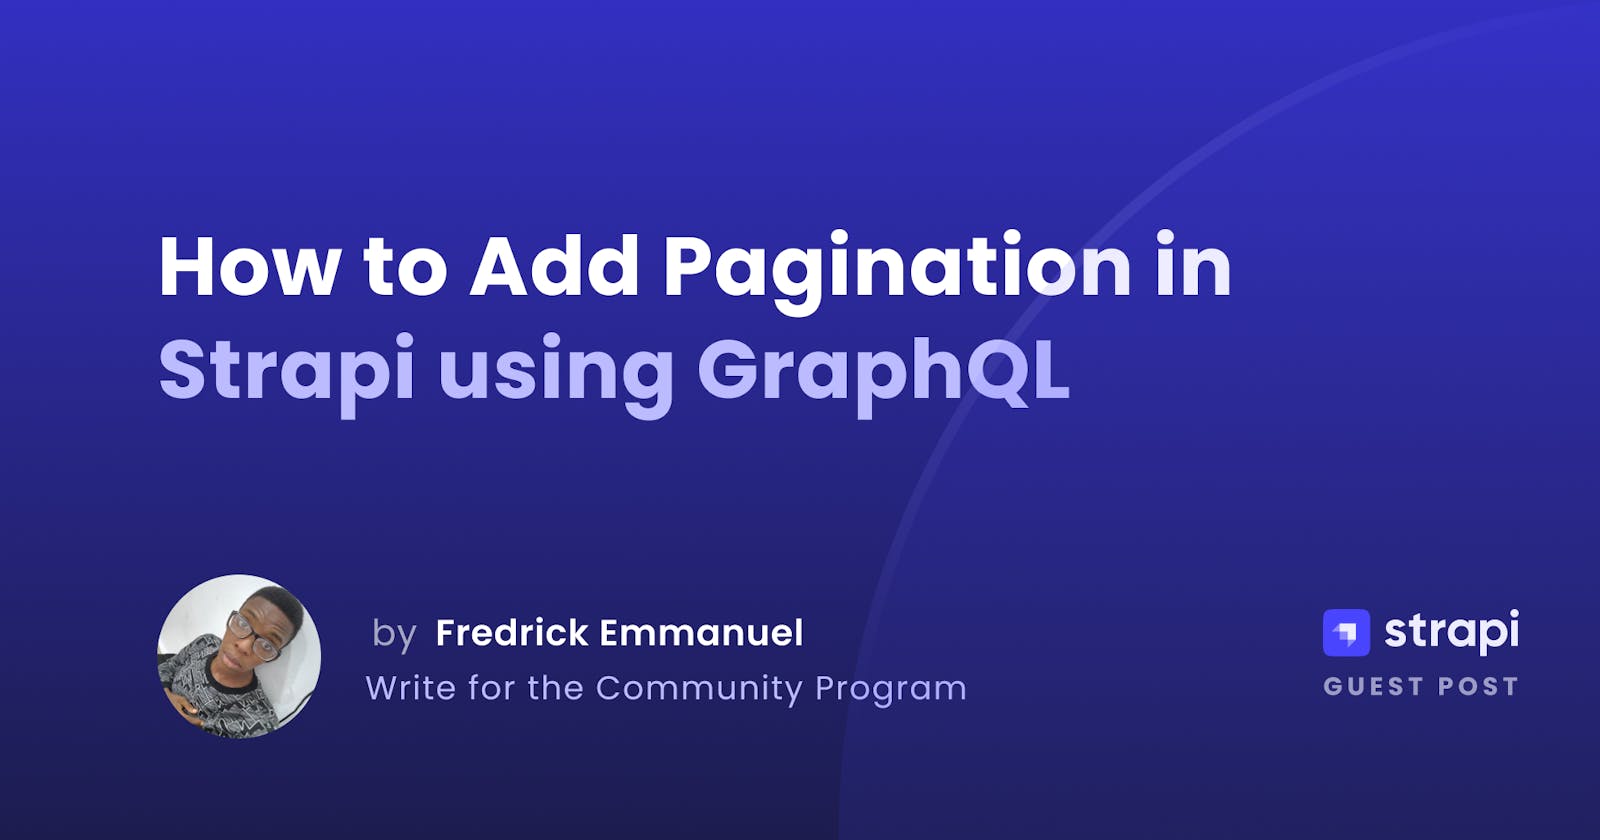 How to Add Pagination in Strapi using GraphQL